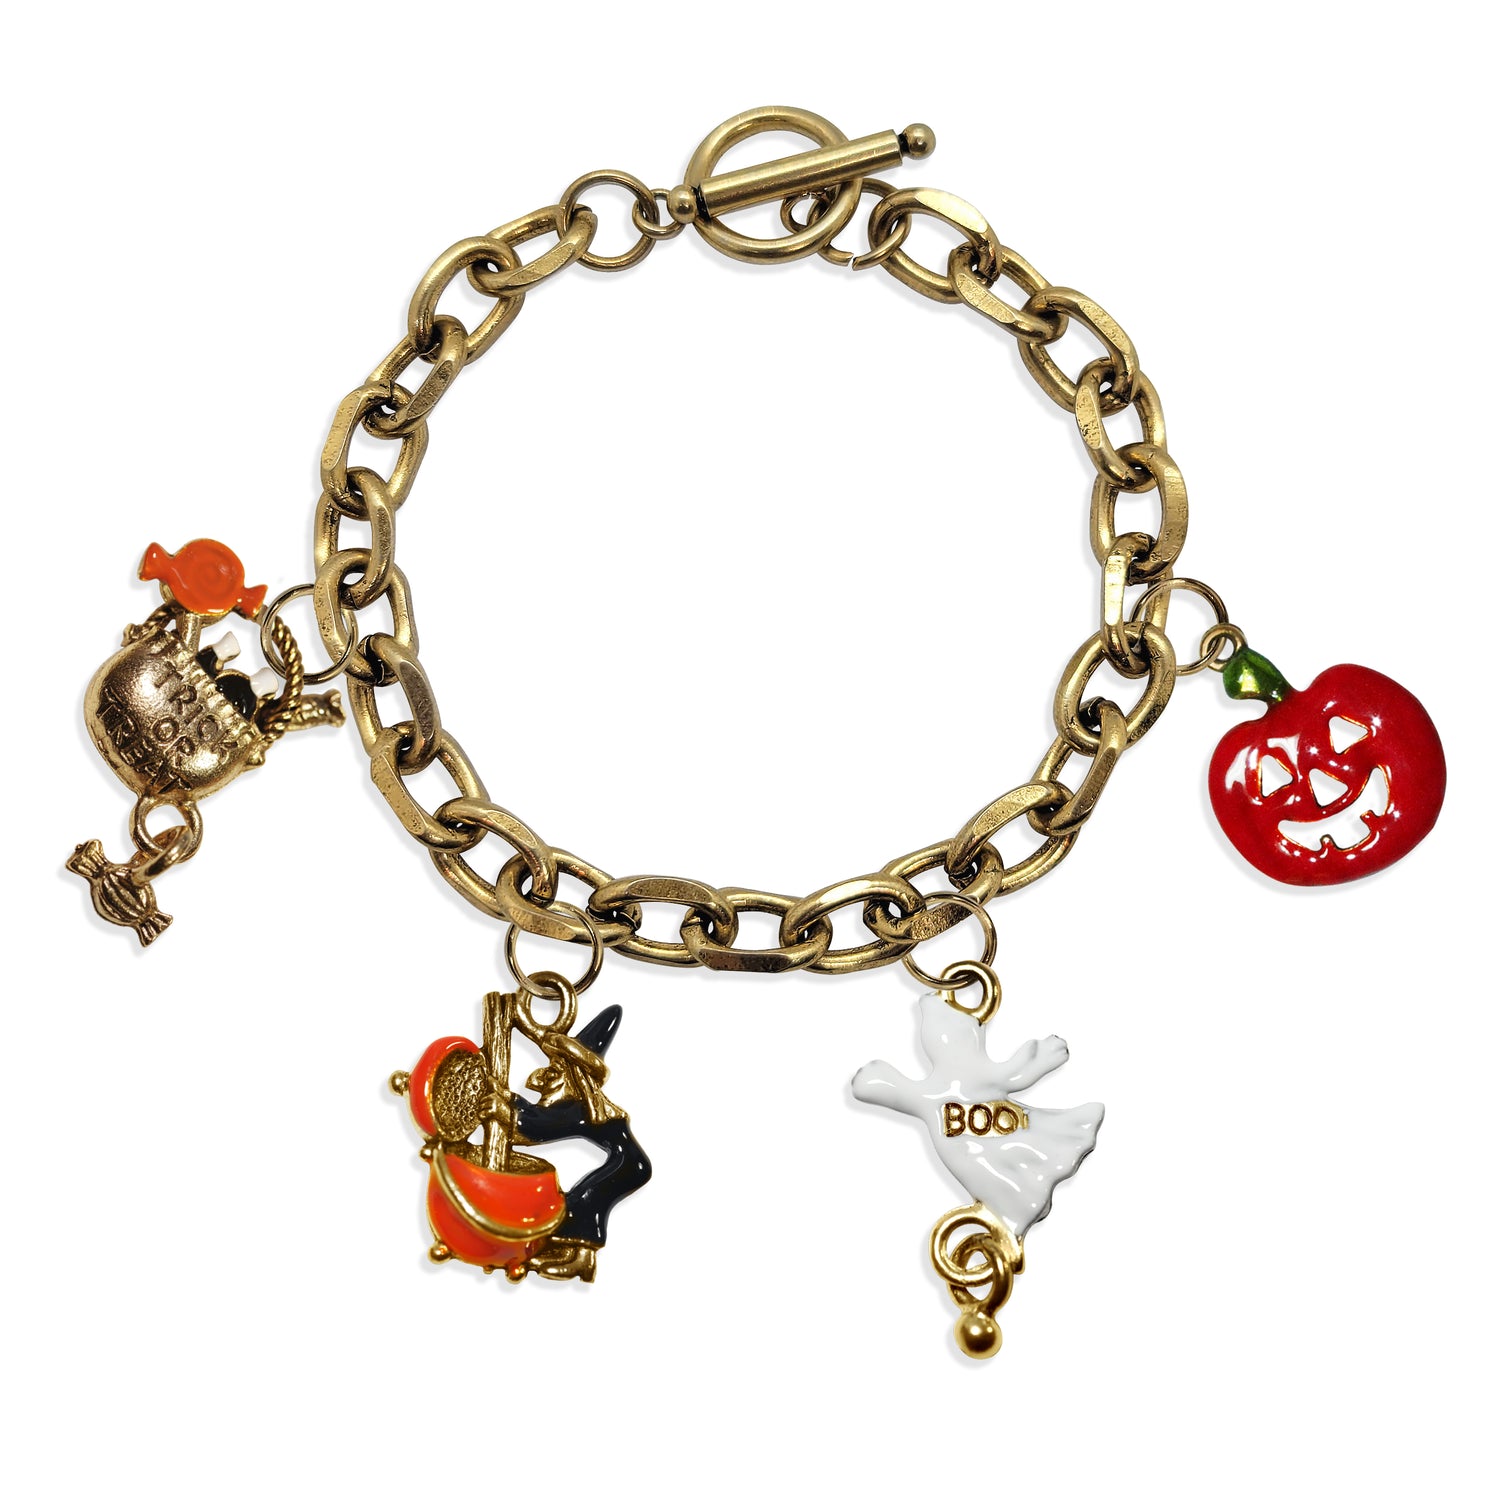 Whimsical Gifts | Halloween Trick or Treat Toggle Charm Bracelet | 4 Handpainted Charms | Antique Gold or Antique Silver Finish in Antique Gold Finish | Holiday & Seasonal Themed | Halloween Jewelry